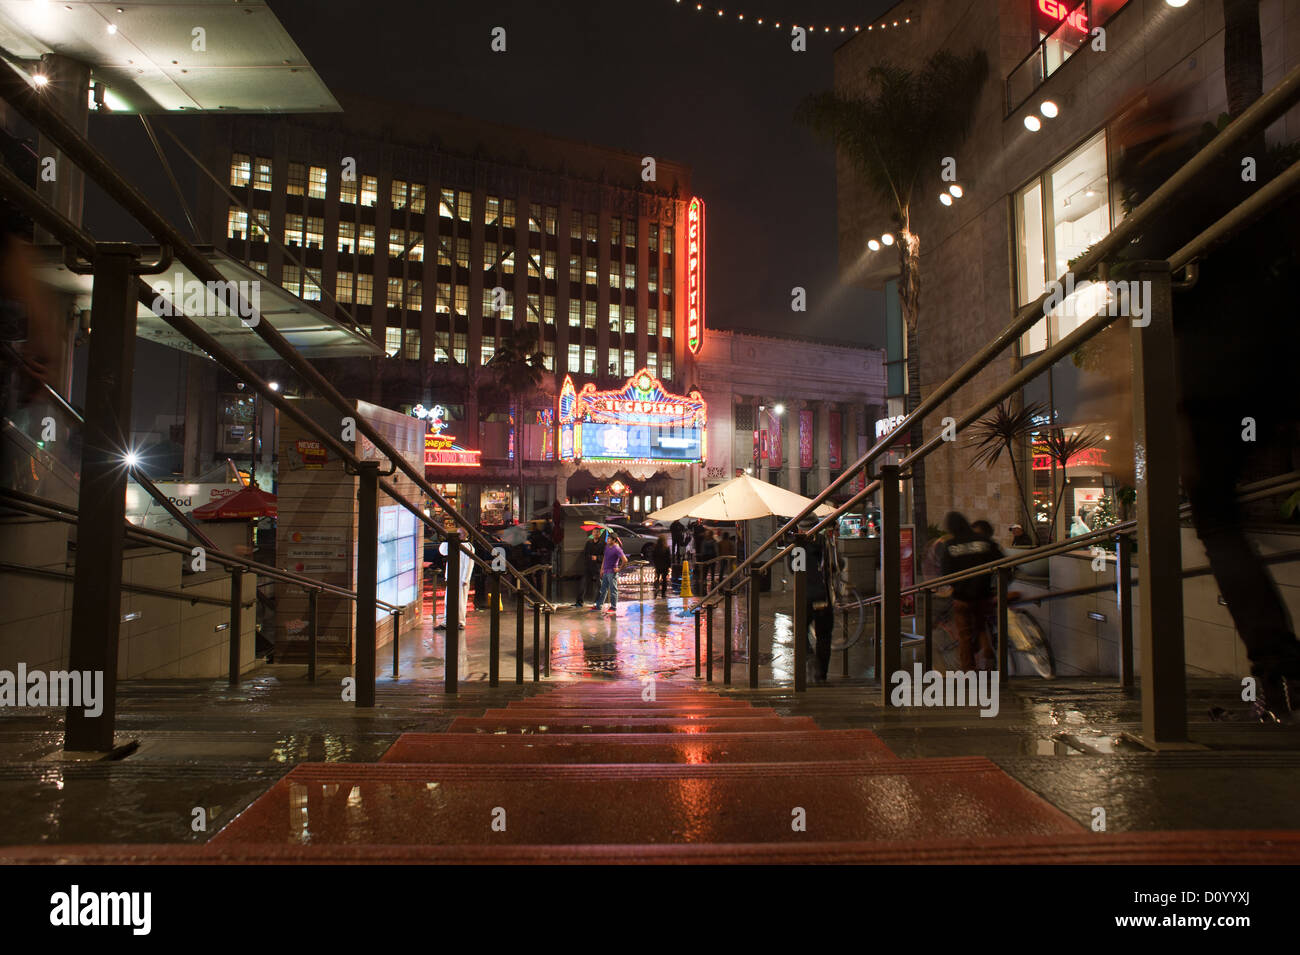 Nighttime view of Hollywood Boulevard from the steps of the Hollywood & Highland Center in Los Angeles, California. Stock Photo